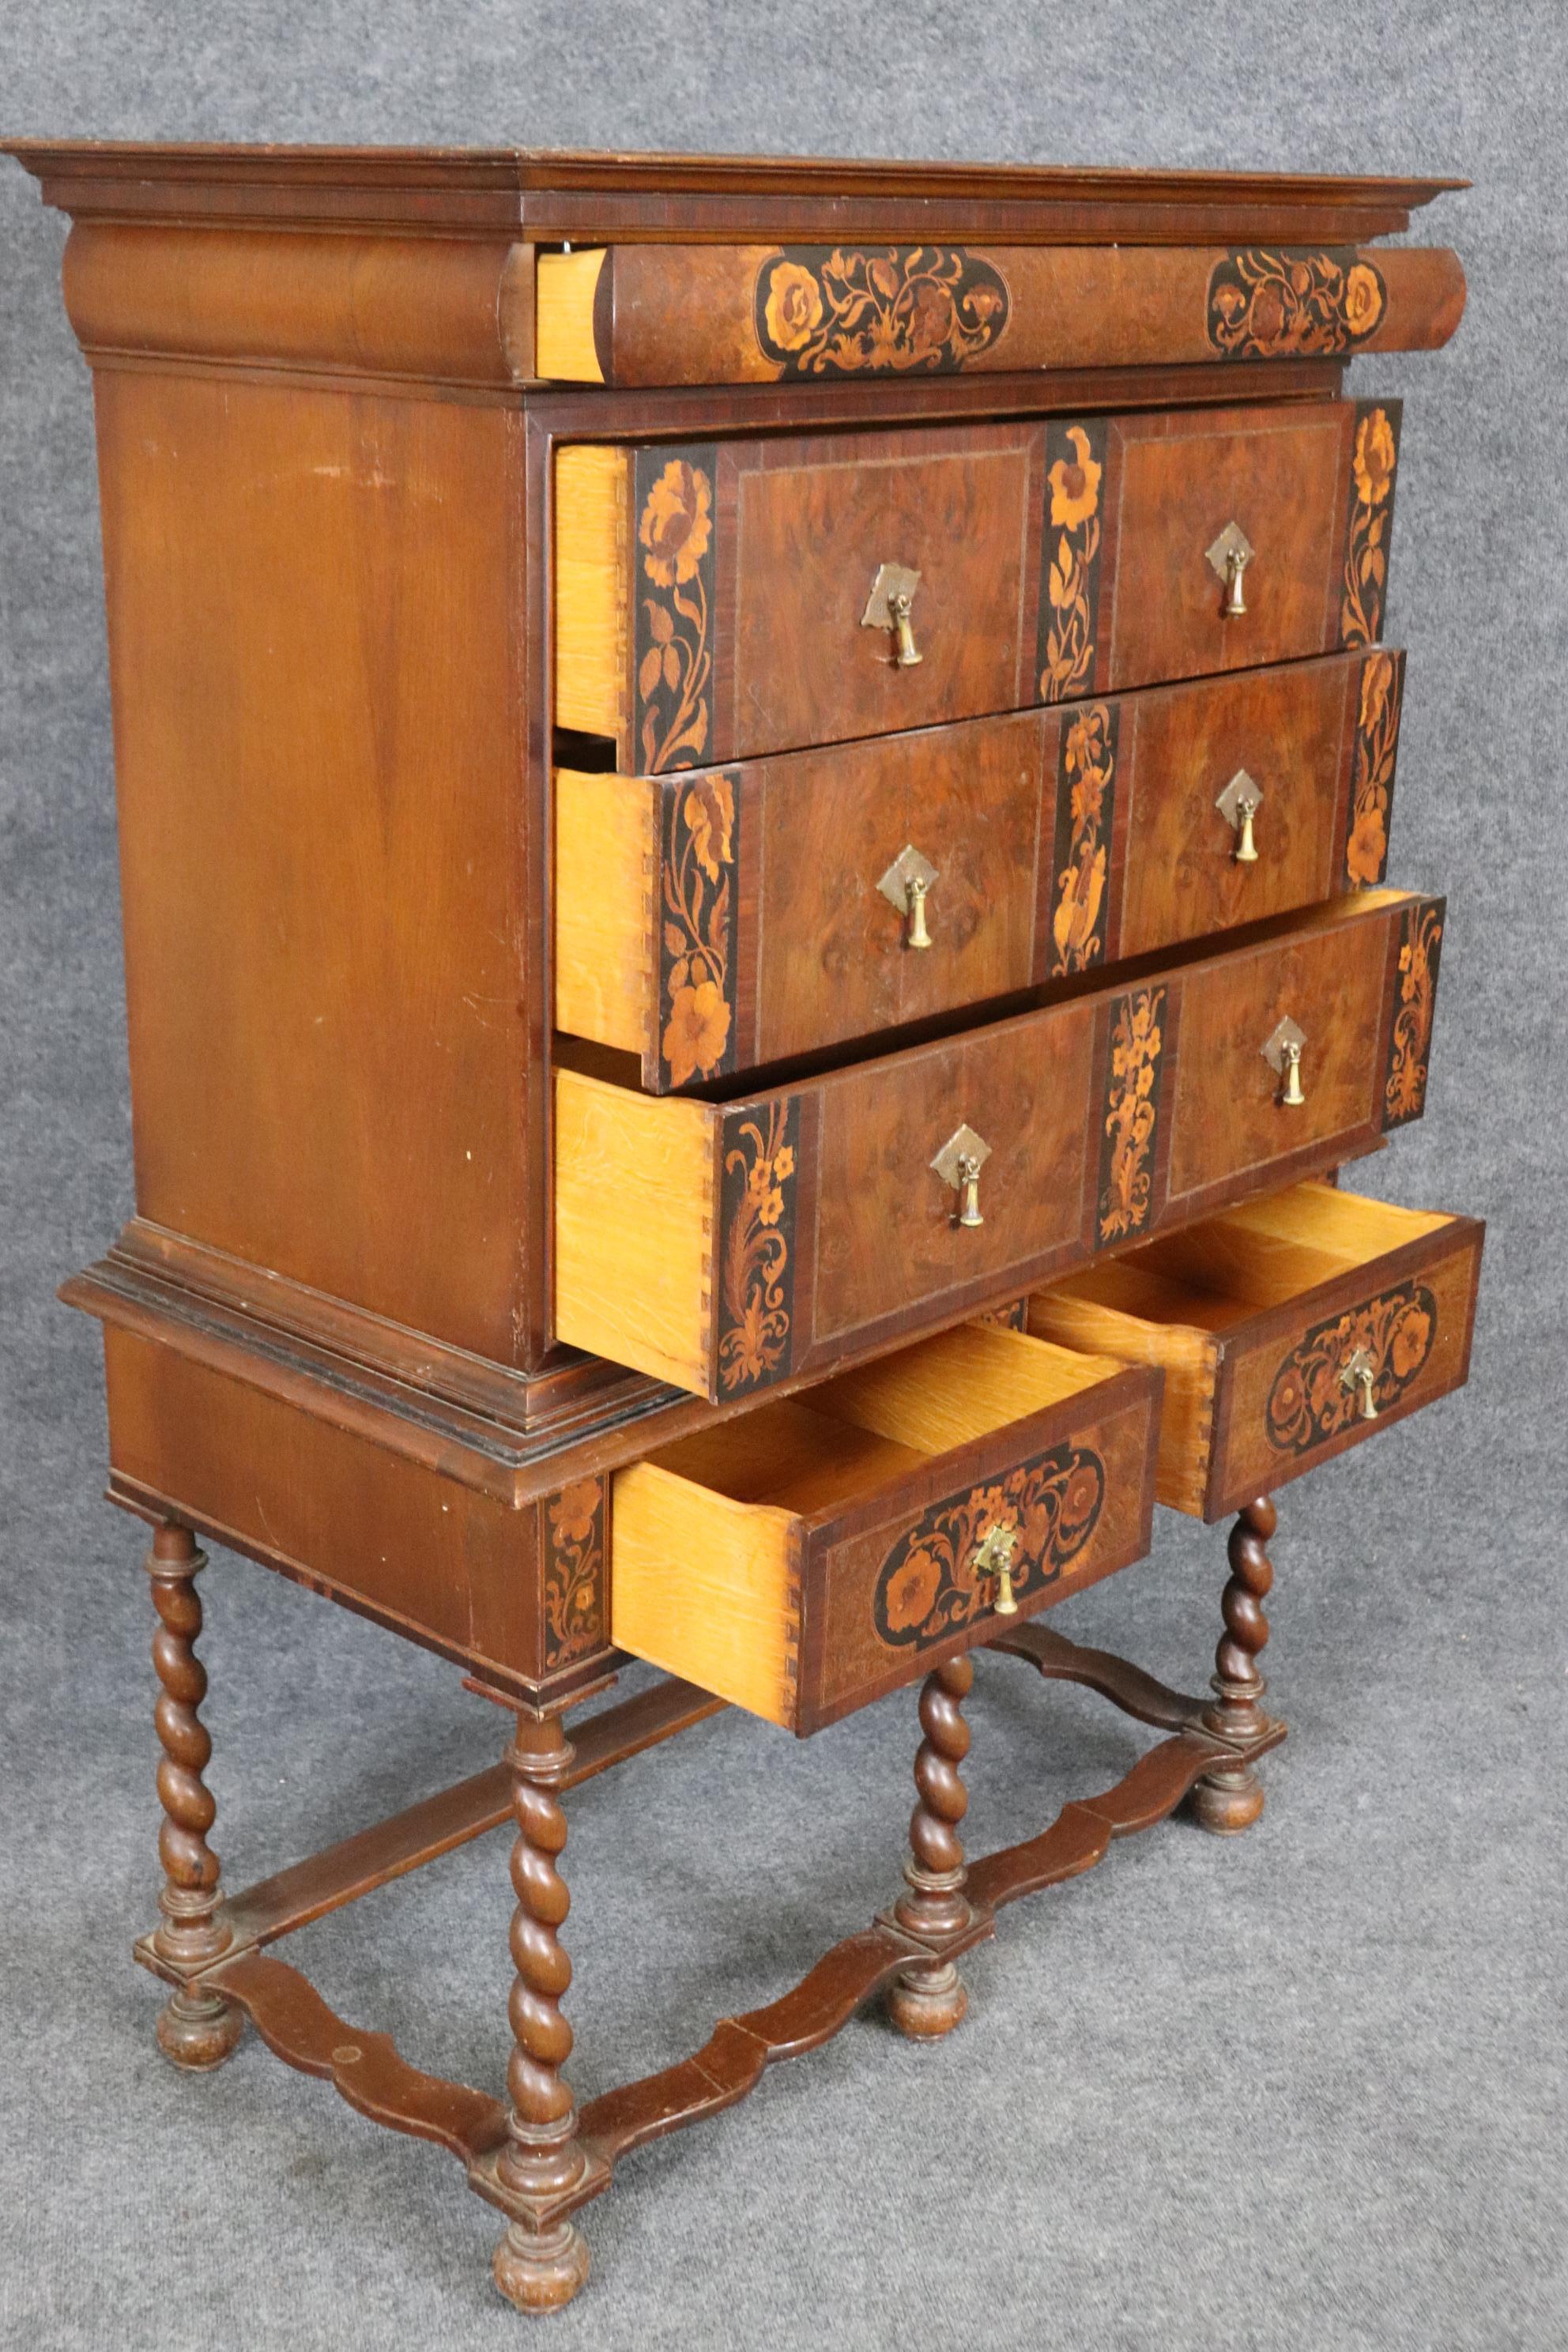 This is a fantastic cabinet made in Rockford, Illinois during the greatest time of American furniture companies that really made innovative and incredible replicas of some of the world's finiest antiques that were completely out of reach for most